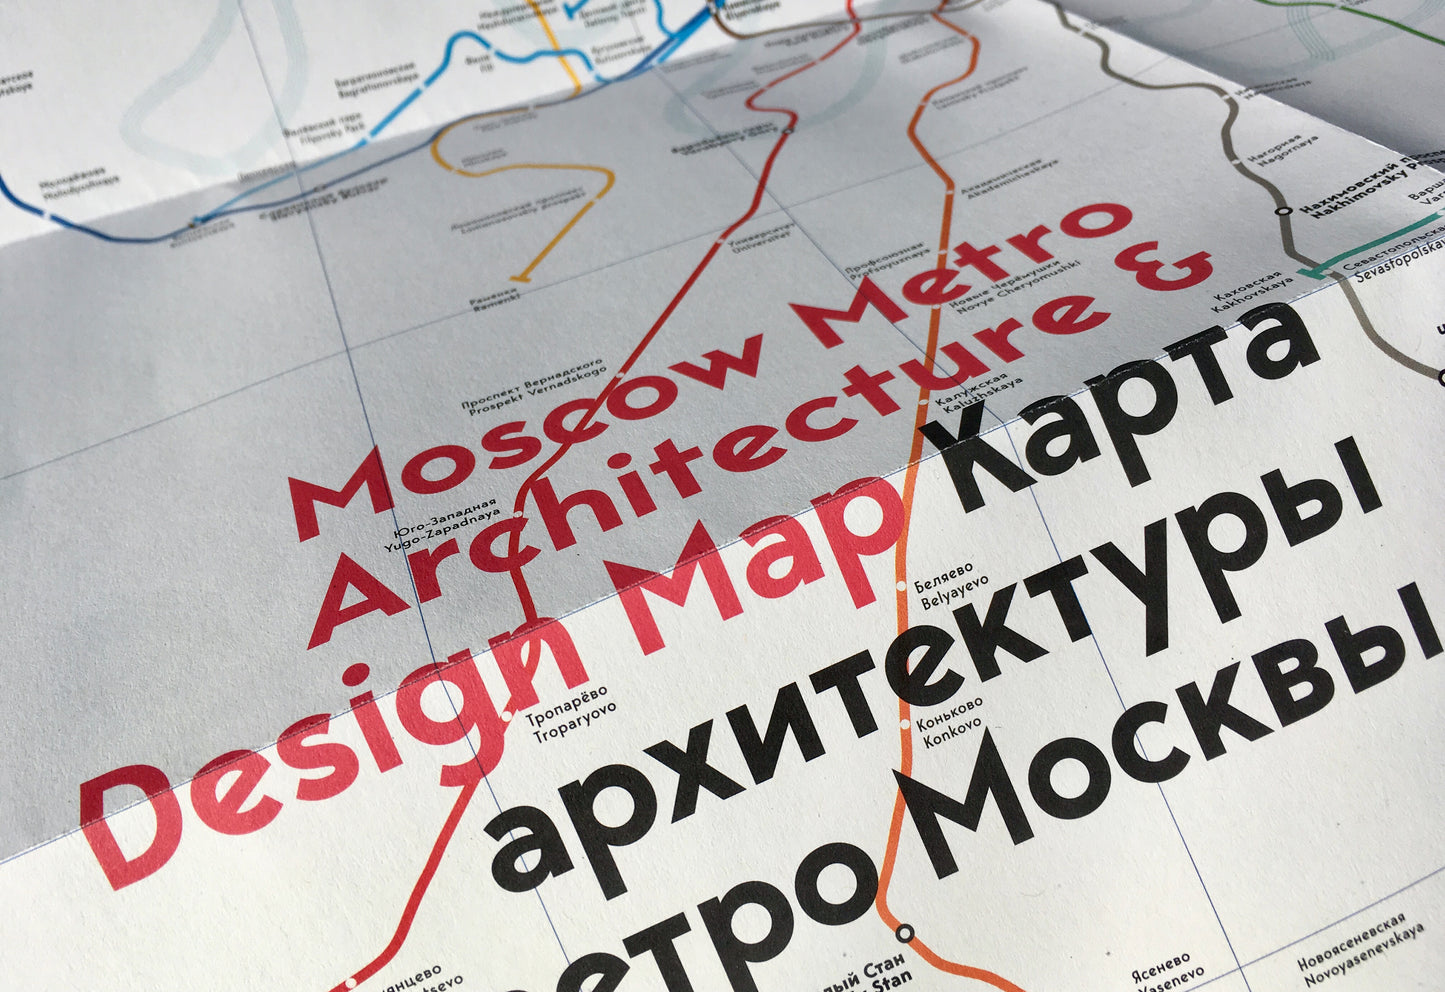 Moscow Metro Architecture & Design Map